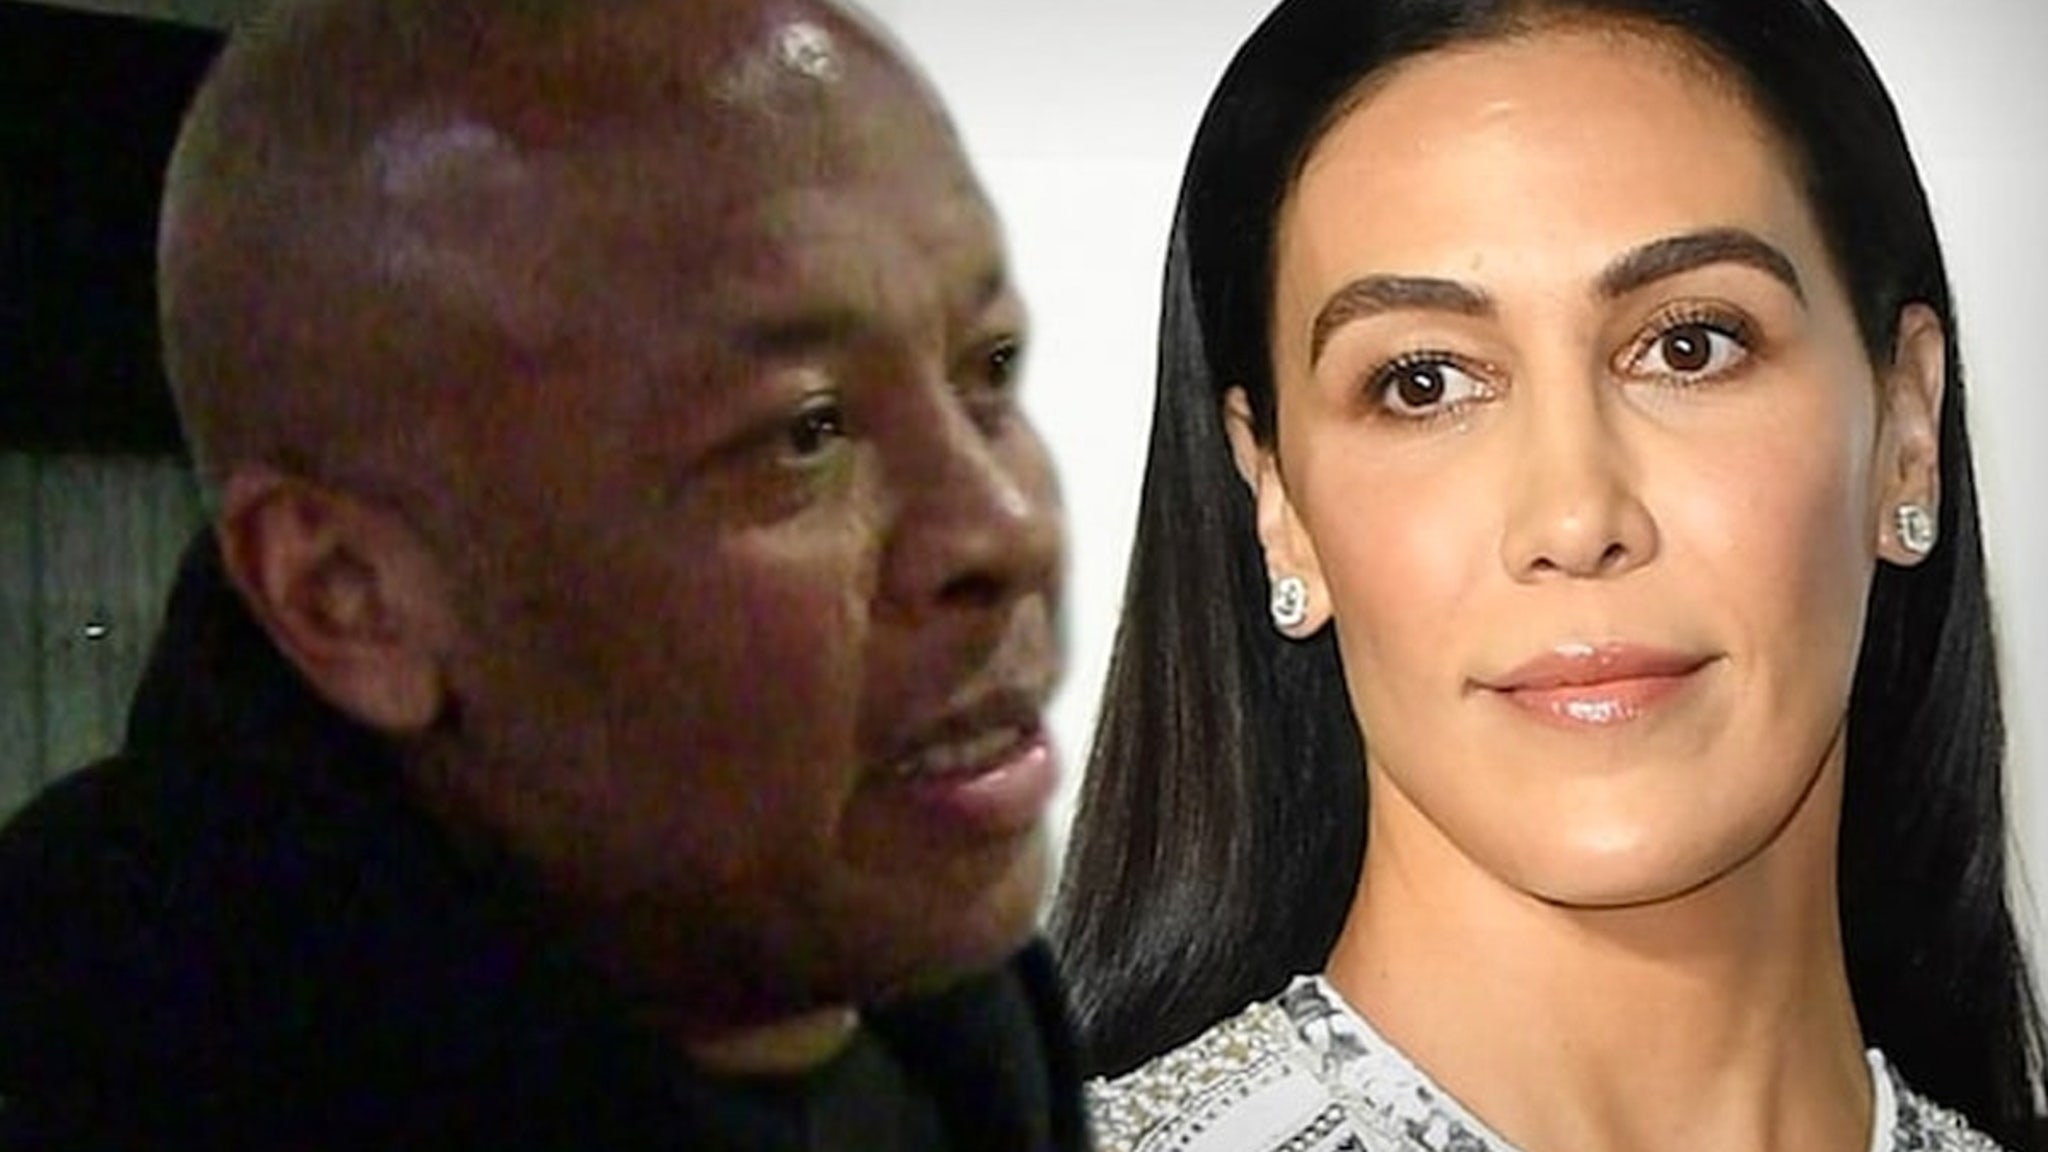 Dr.  Dre denies the claims of abuse by woman, says it is a money grab